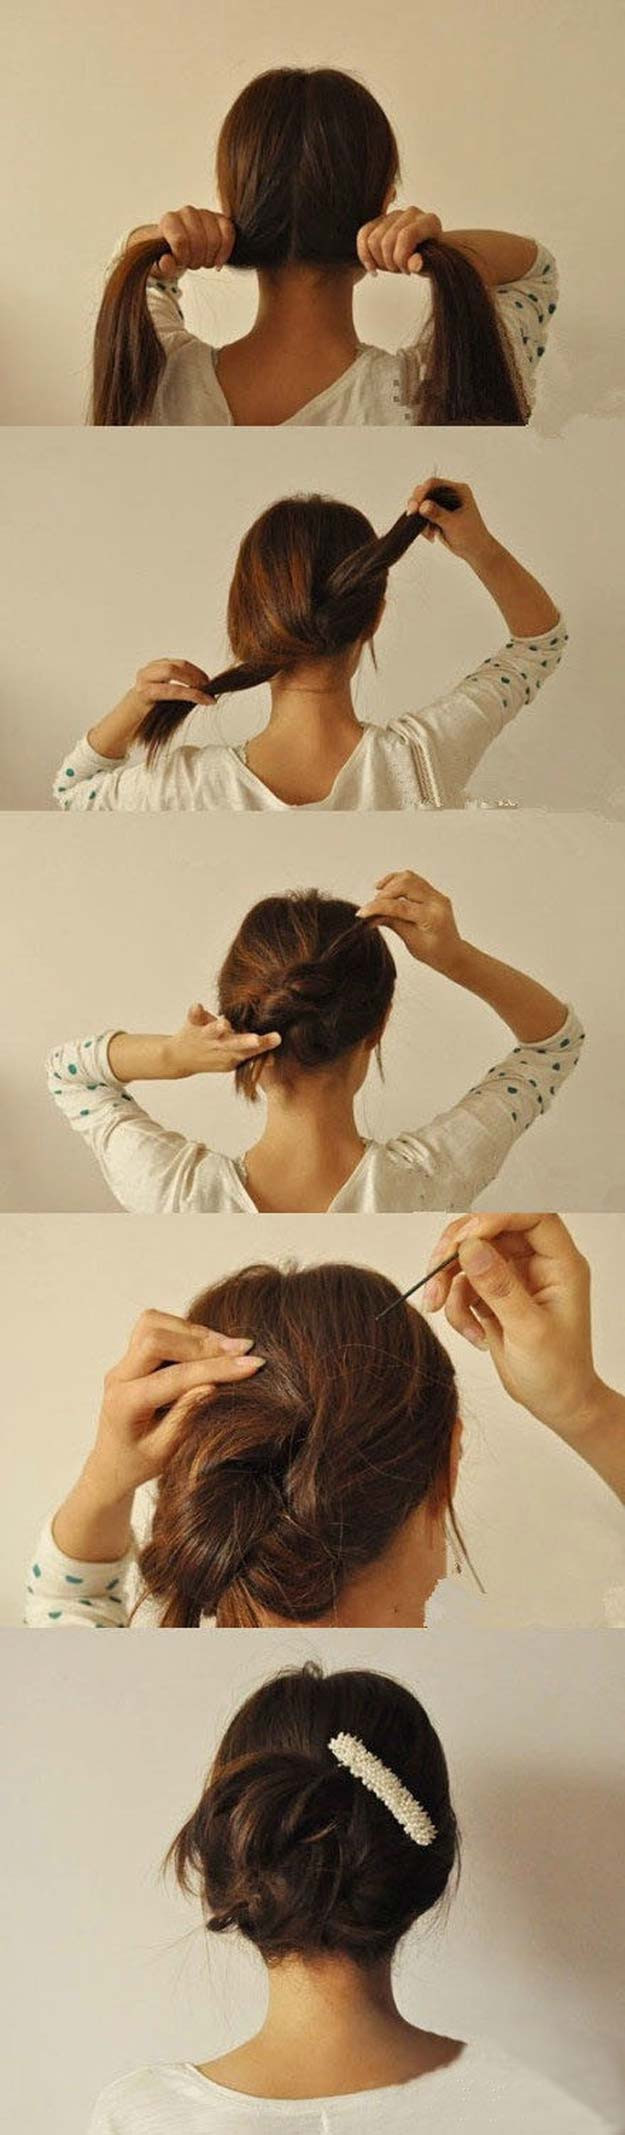 DIY Long Hair Updo
 36 Best Hairstyles for Long Hair DIY Projects for Teens